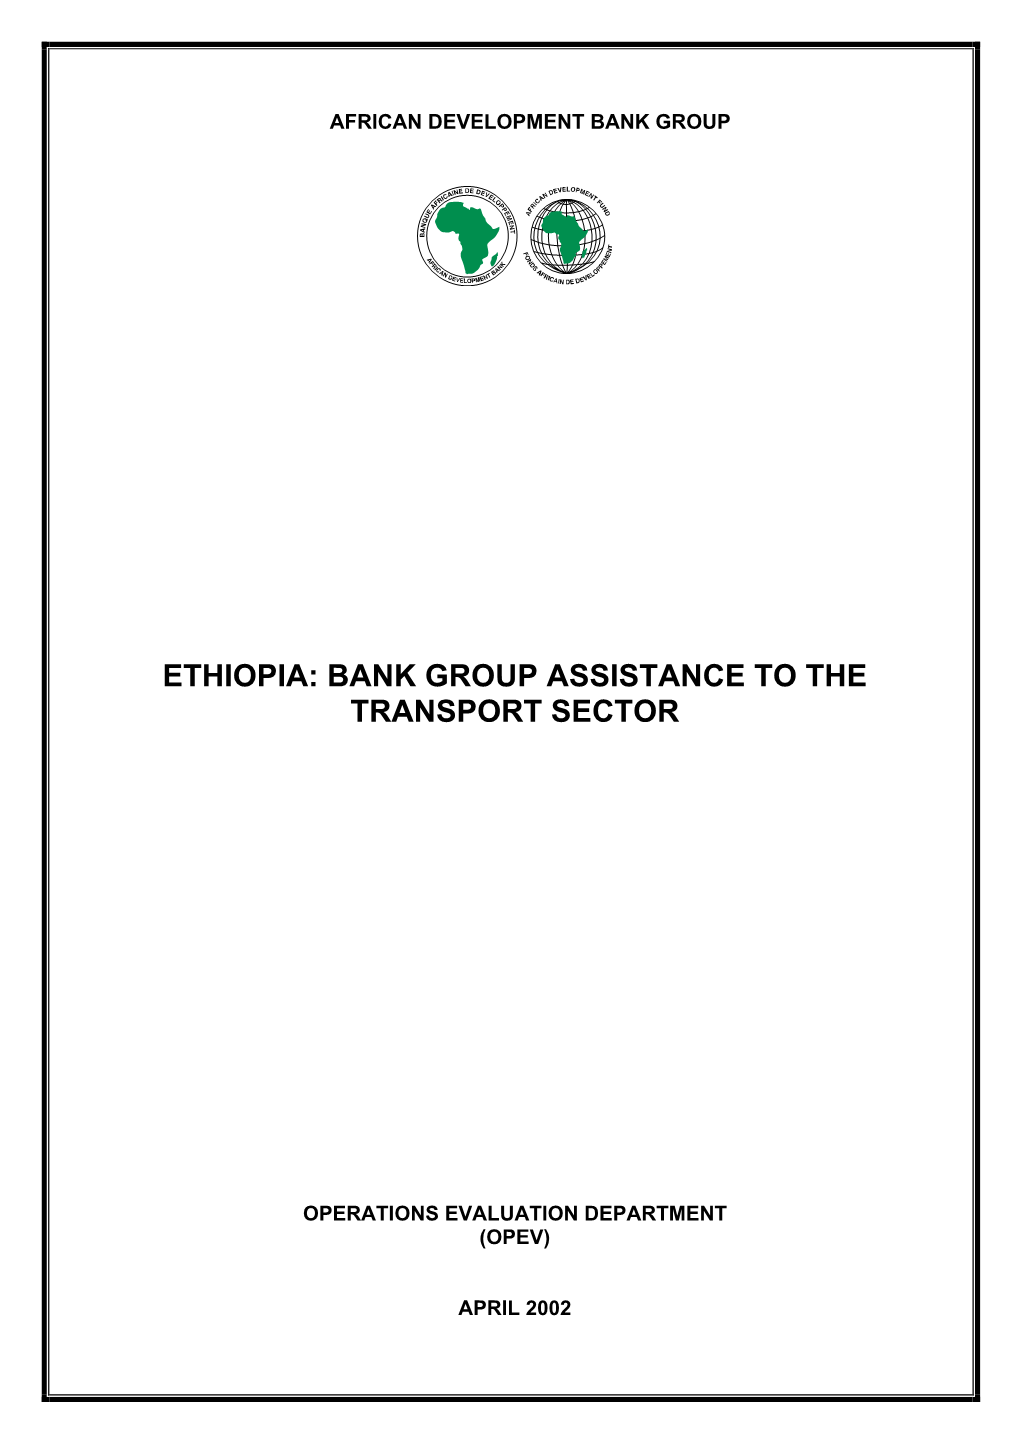 Ethiopia: Bank Group Assistance to the Transport Sector